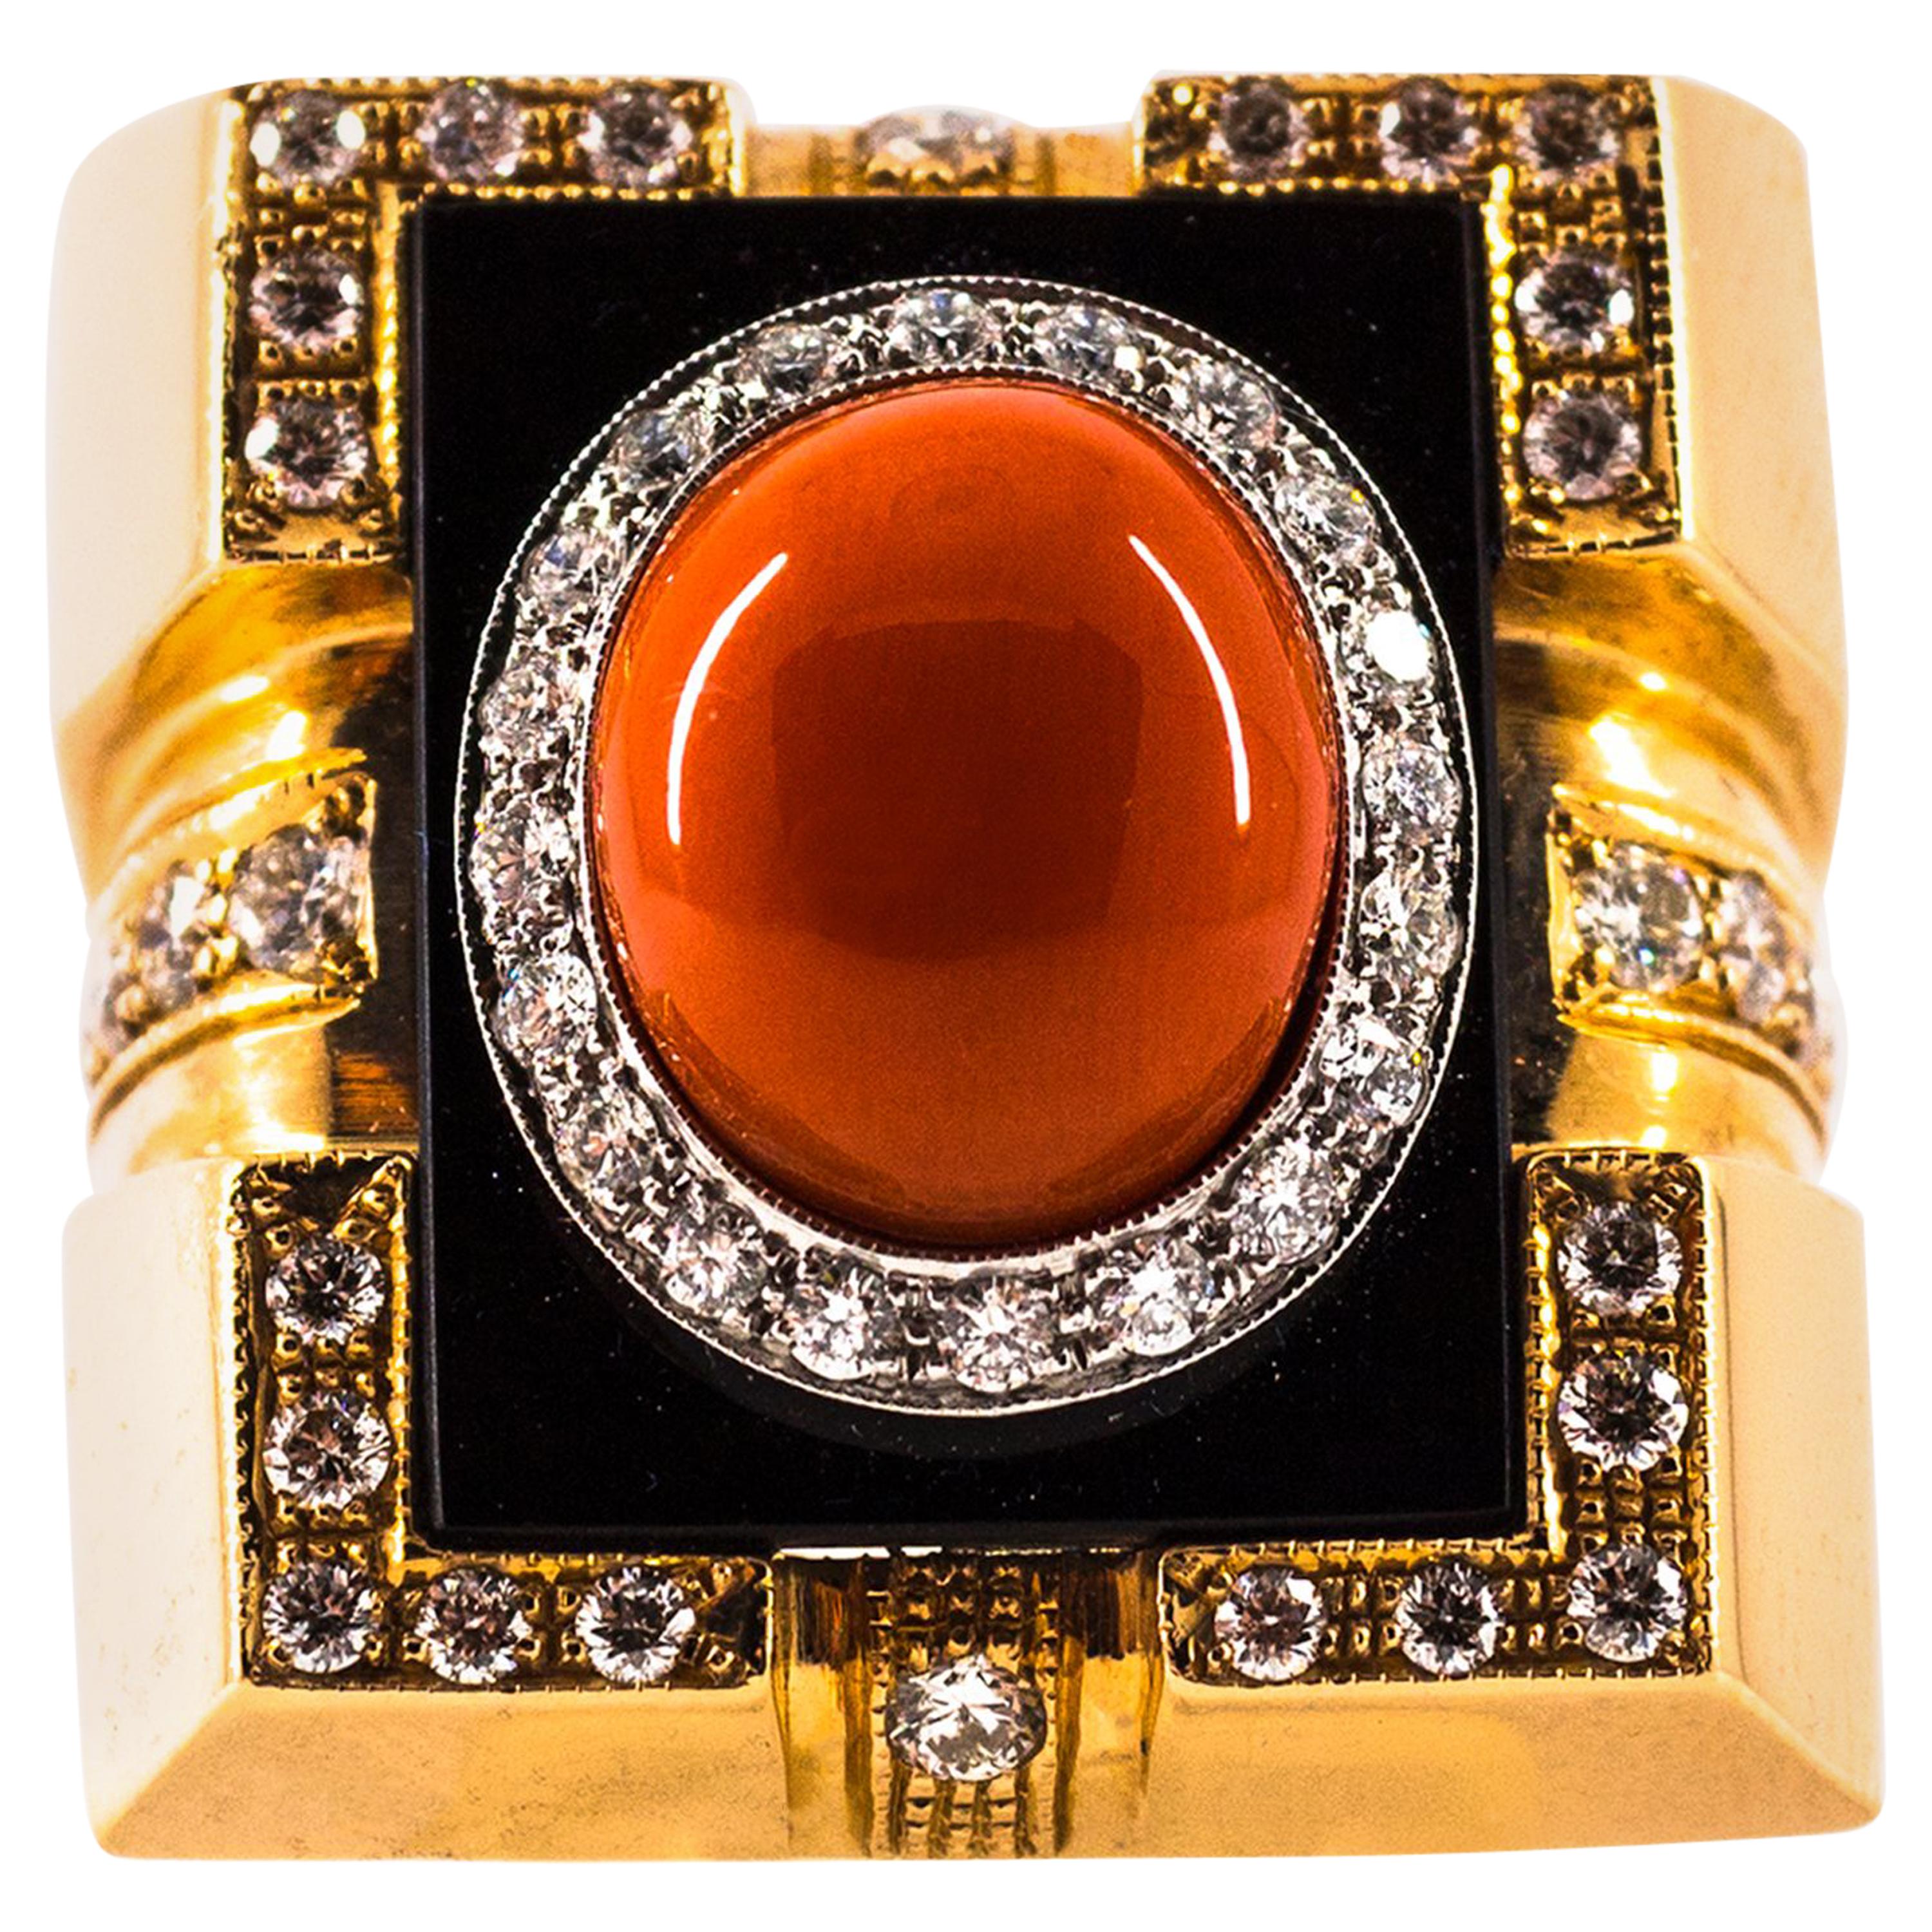 This Ring is made of 14K Yellow Gold.
This Ring has 1.00 Carats of White Brilliant Cut Diamonds.
This Ring has Red Mediterranean (Sardinia, Italy) Coral.
This Ring has also Onyx.

Size ITA: 14 USA: 7 

We're a workshop so every piece is handmade,